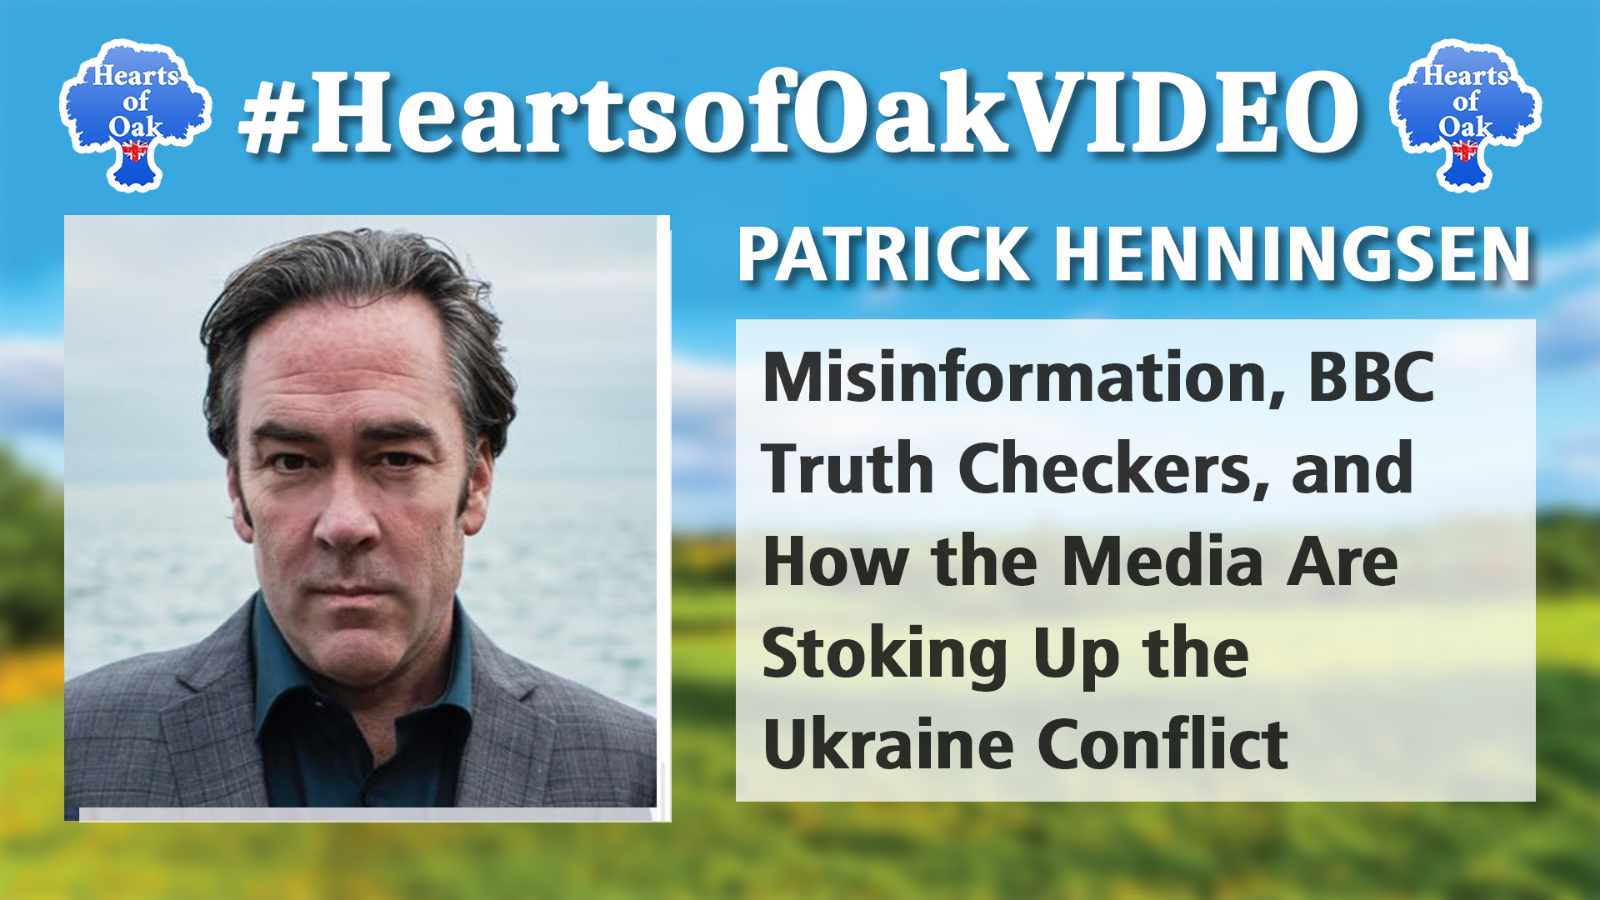 Patrick Henningsen - Misinformation, BBC Truth Checkers & how Media are Stoking up Ukraine Conflict